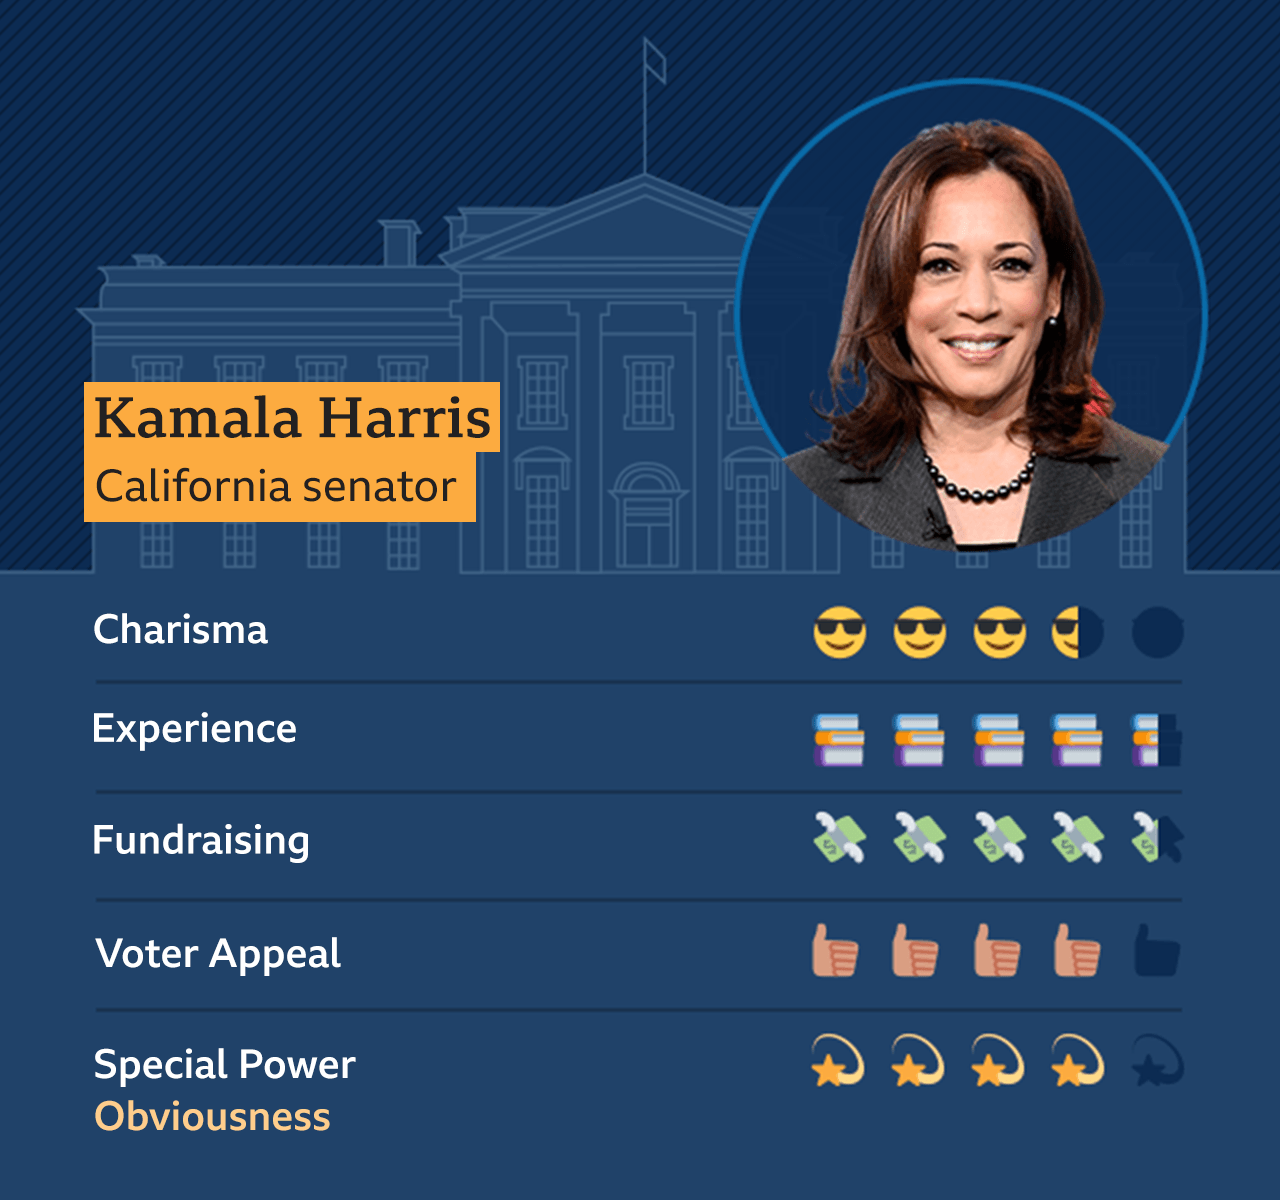 Graphic showing Kamala Harris, with the scores: Charisma, 3.5, Experience, 4.5, Fundraising, 4.5, Voter Power, 4, Special Power: Obivousness - 4